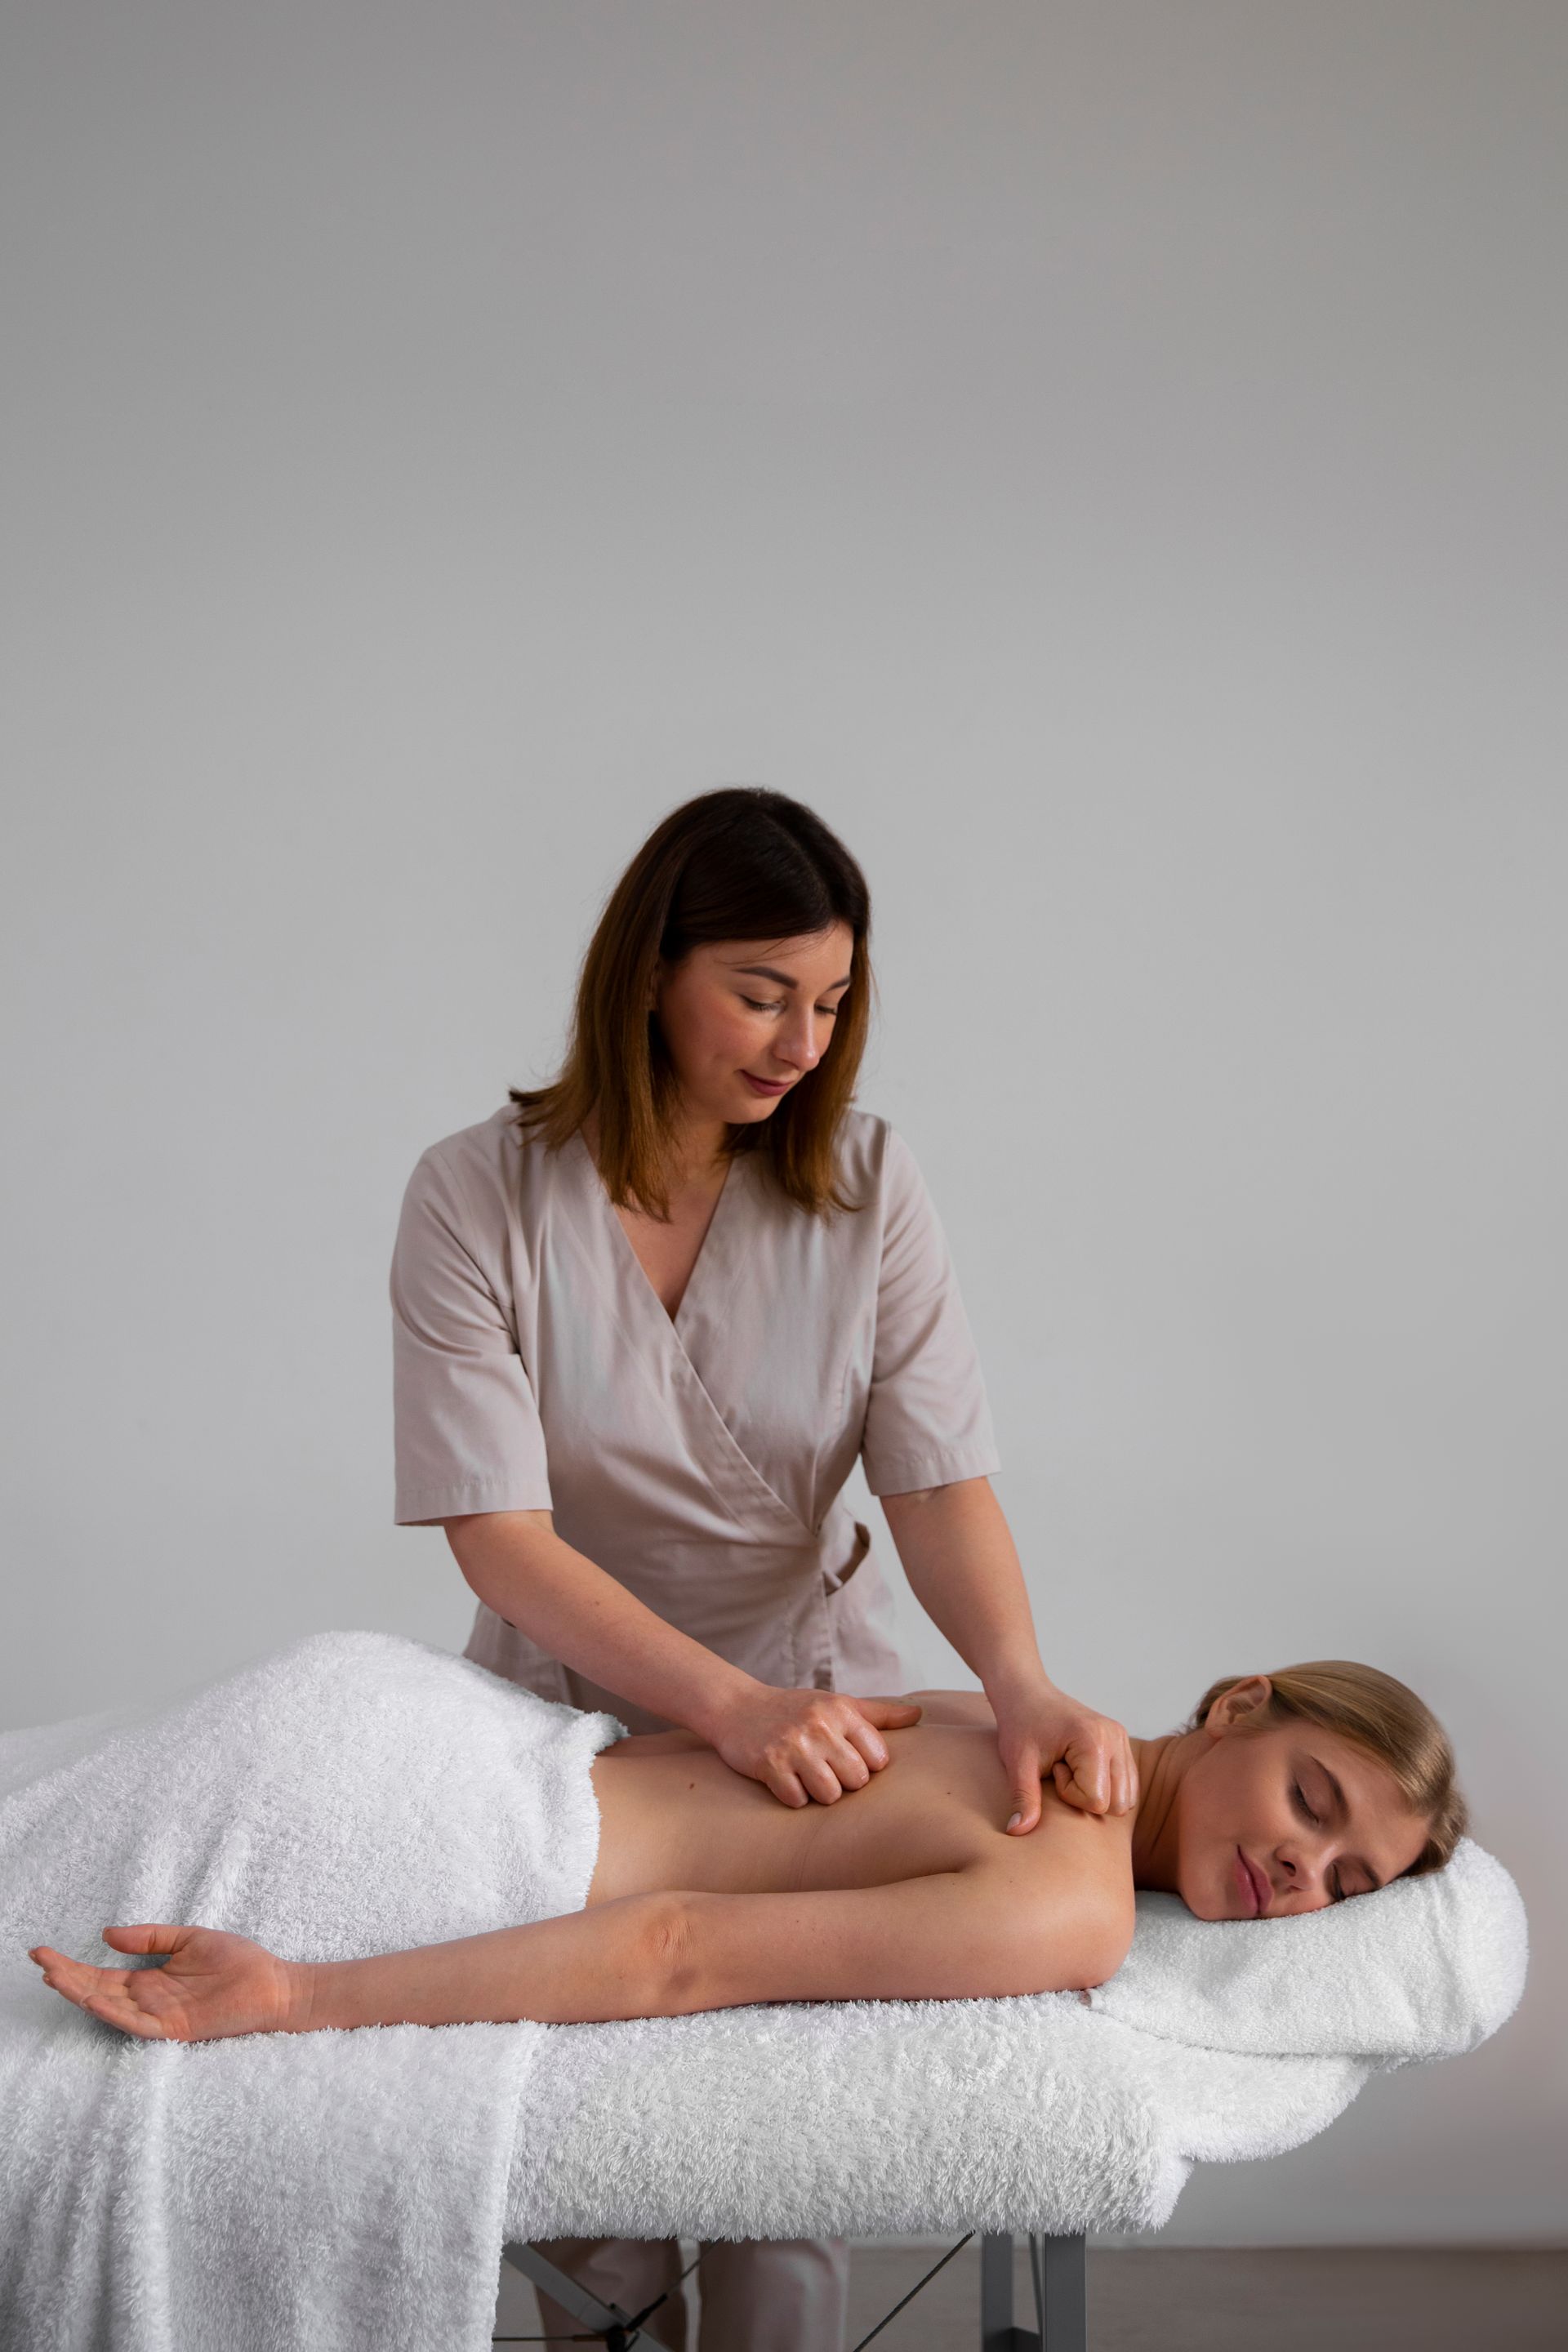 woman getting massage therapy